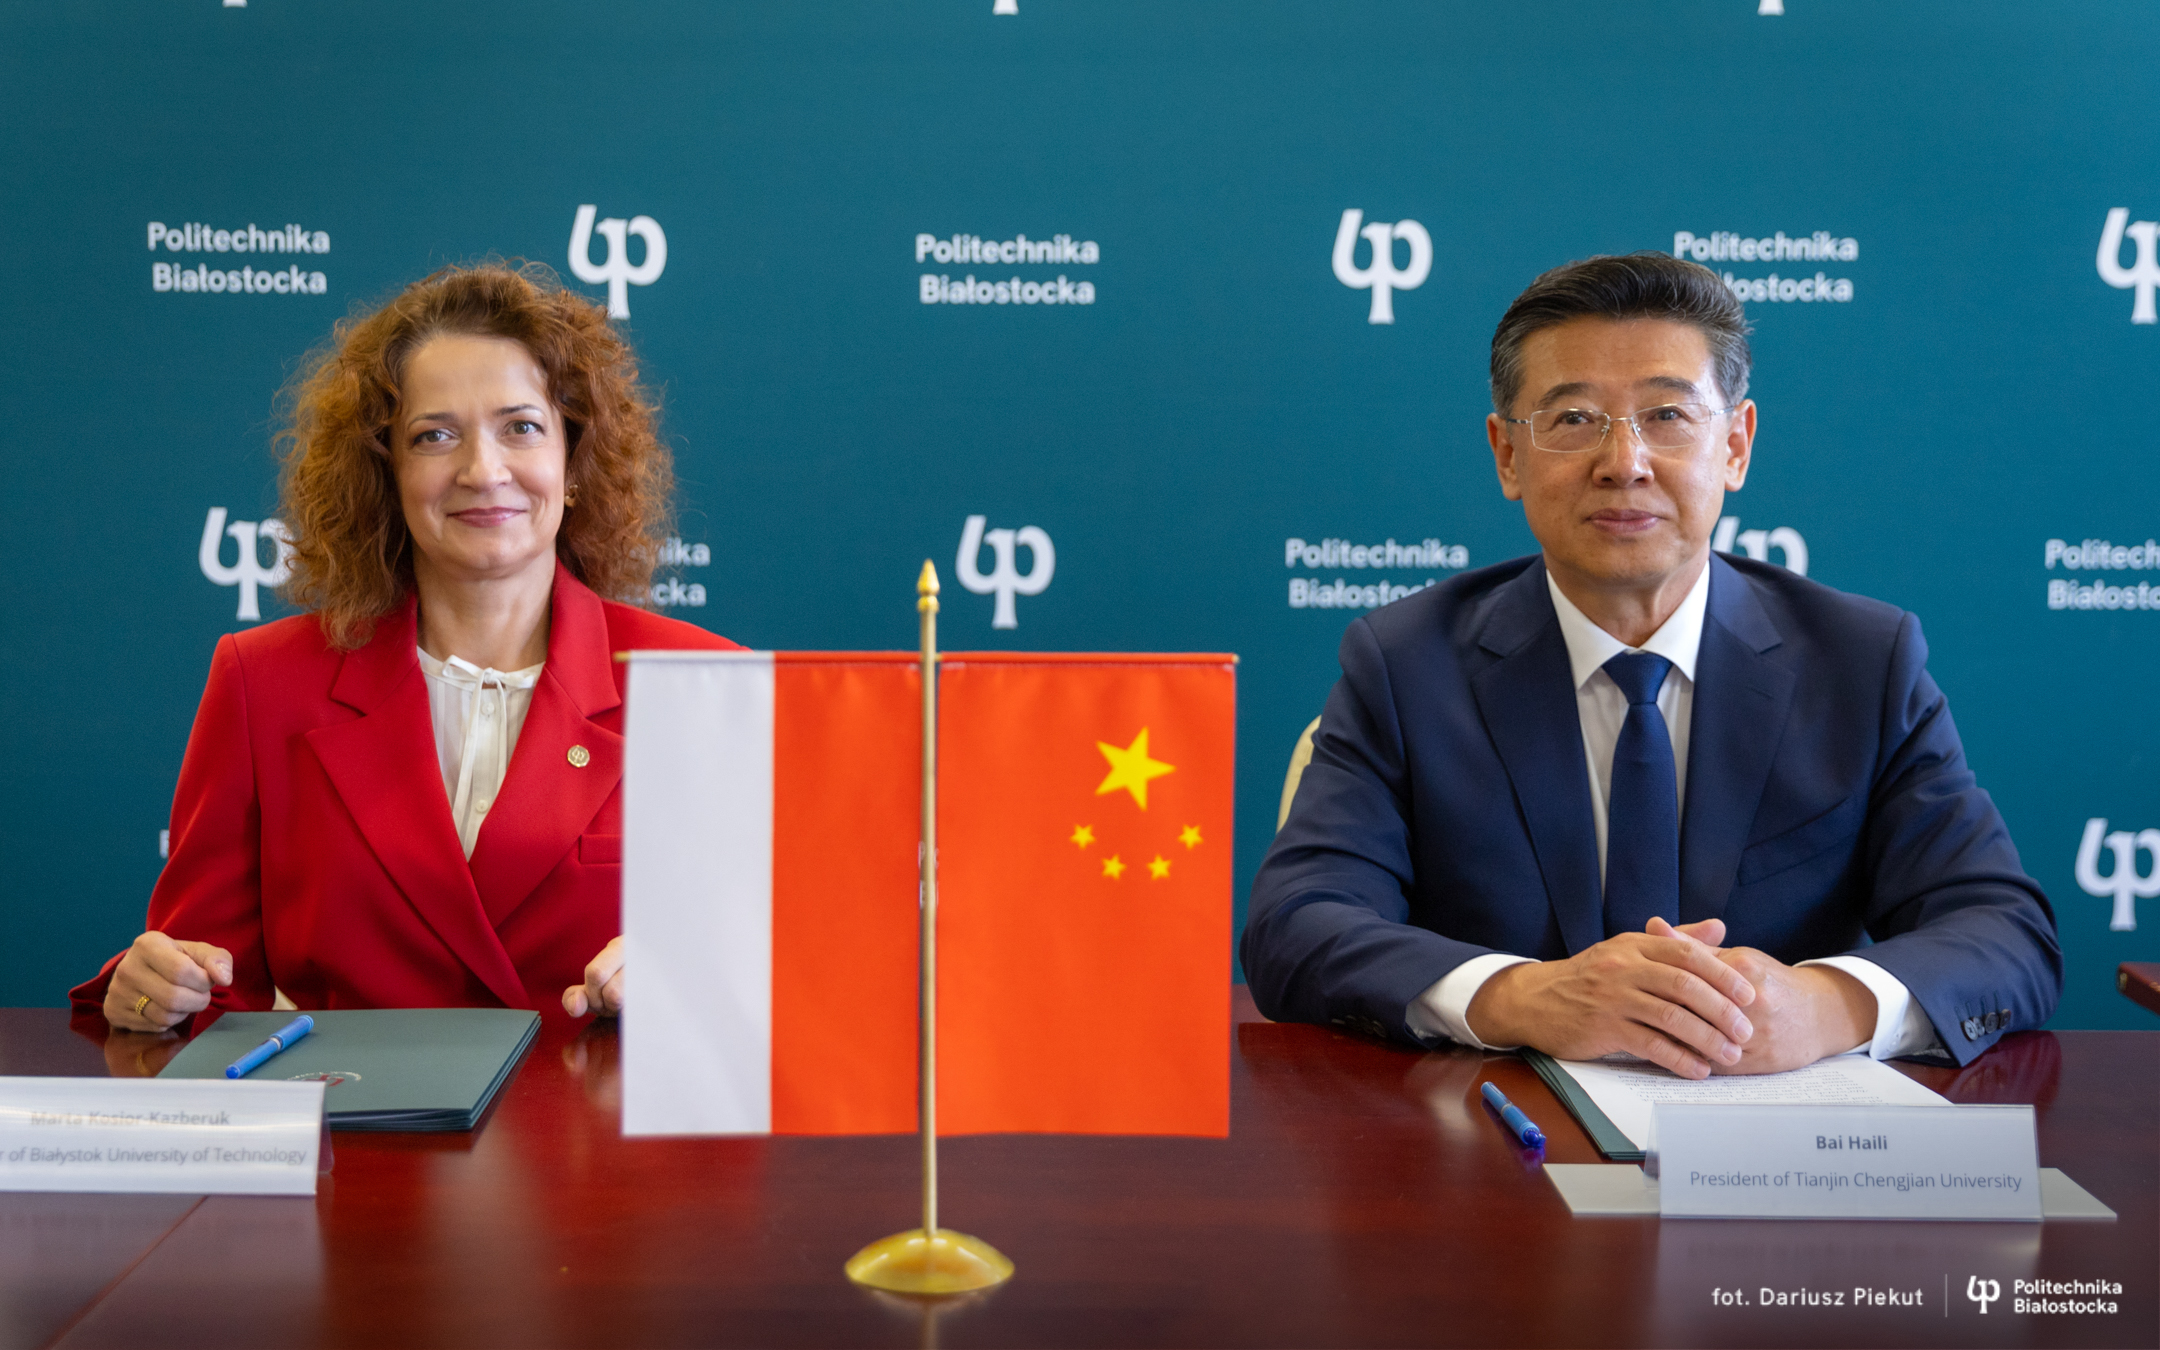 Assoc. Prof. Marta Kosior-Kazberuk, DSc, PhD, Eng, Rector of BUT and Prof. Bai Haili, Rector of Tianjin Chengjian University sit at a table, documents lie in front of them, Polish and Chinese flags are on the table.